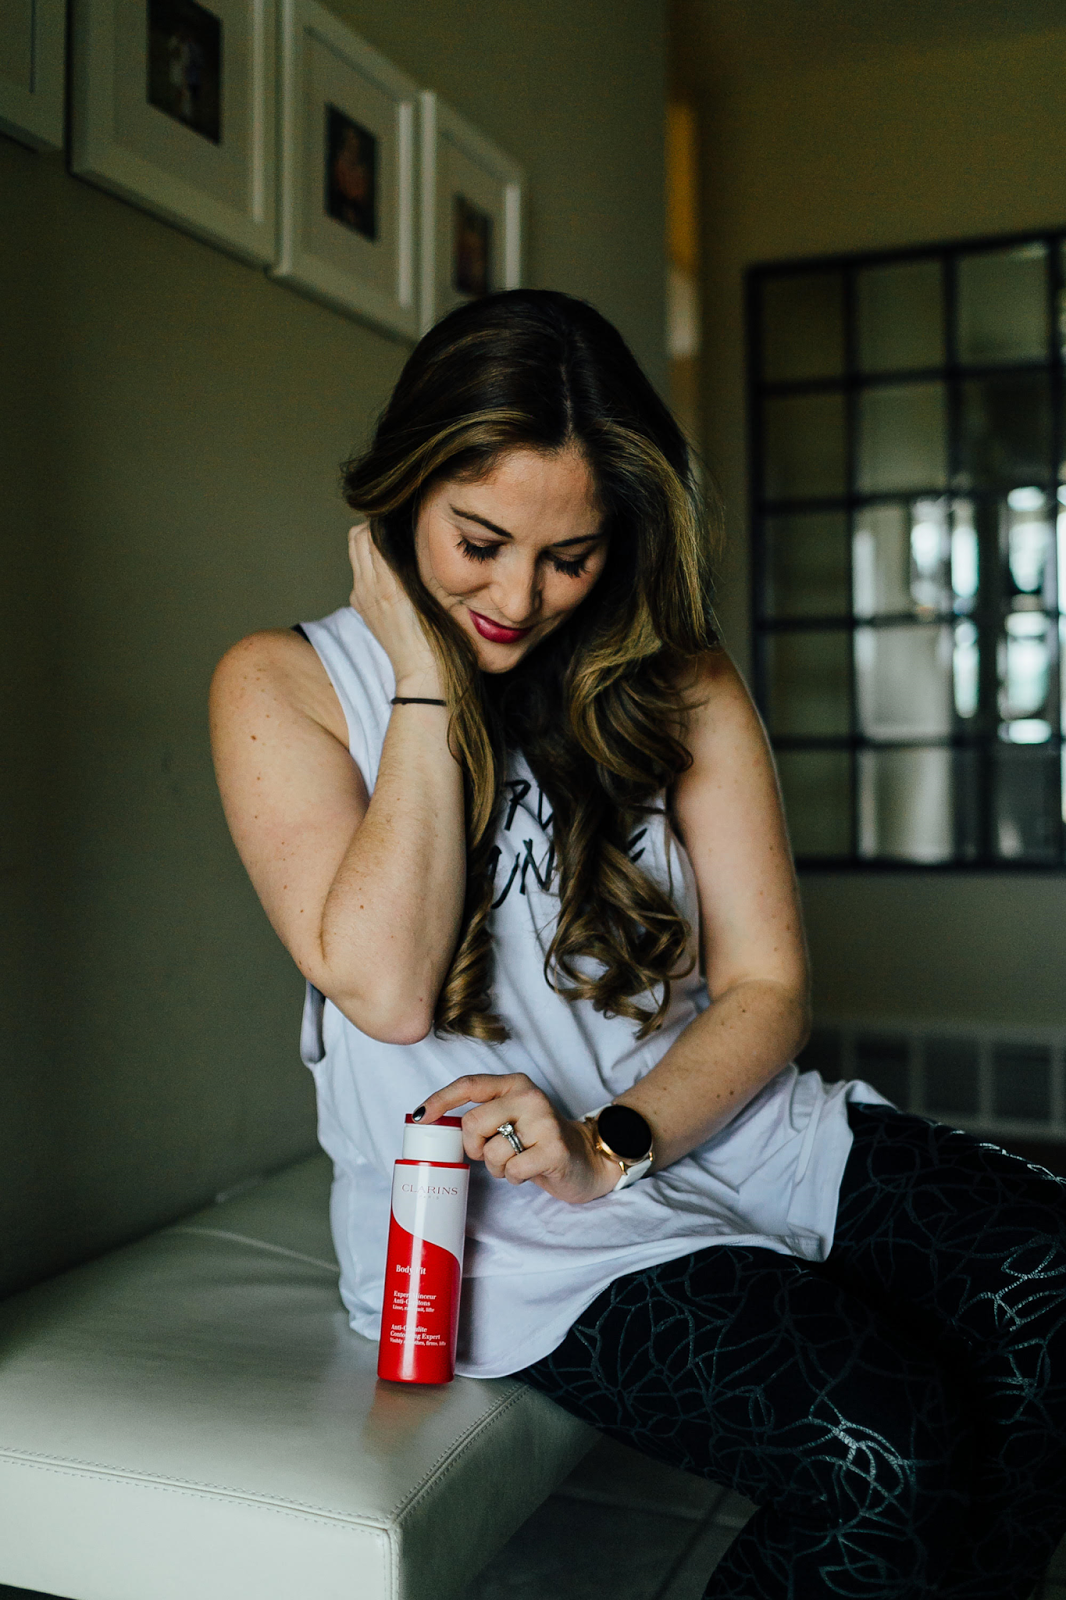 Post Workout Routine - the 5 Things I keep in My Gym Bag by lifestyle blogger Laura from Walking in Memphis in High Heels